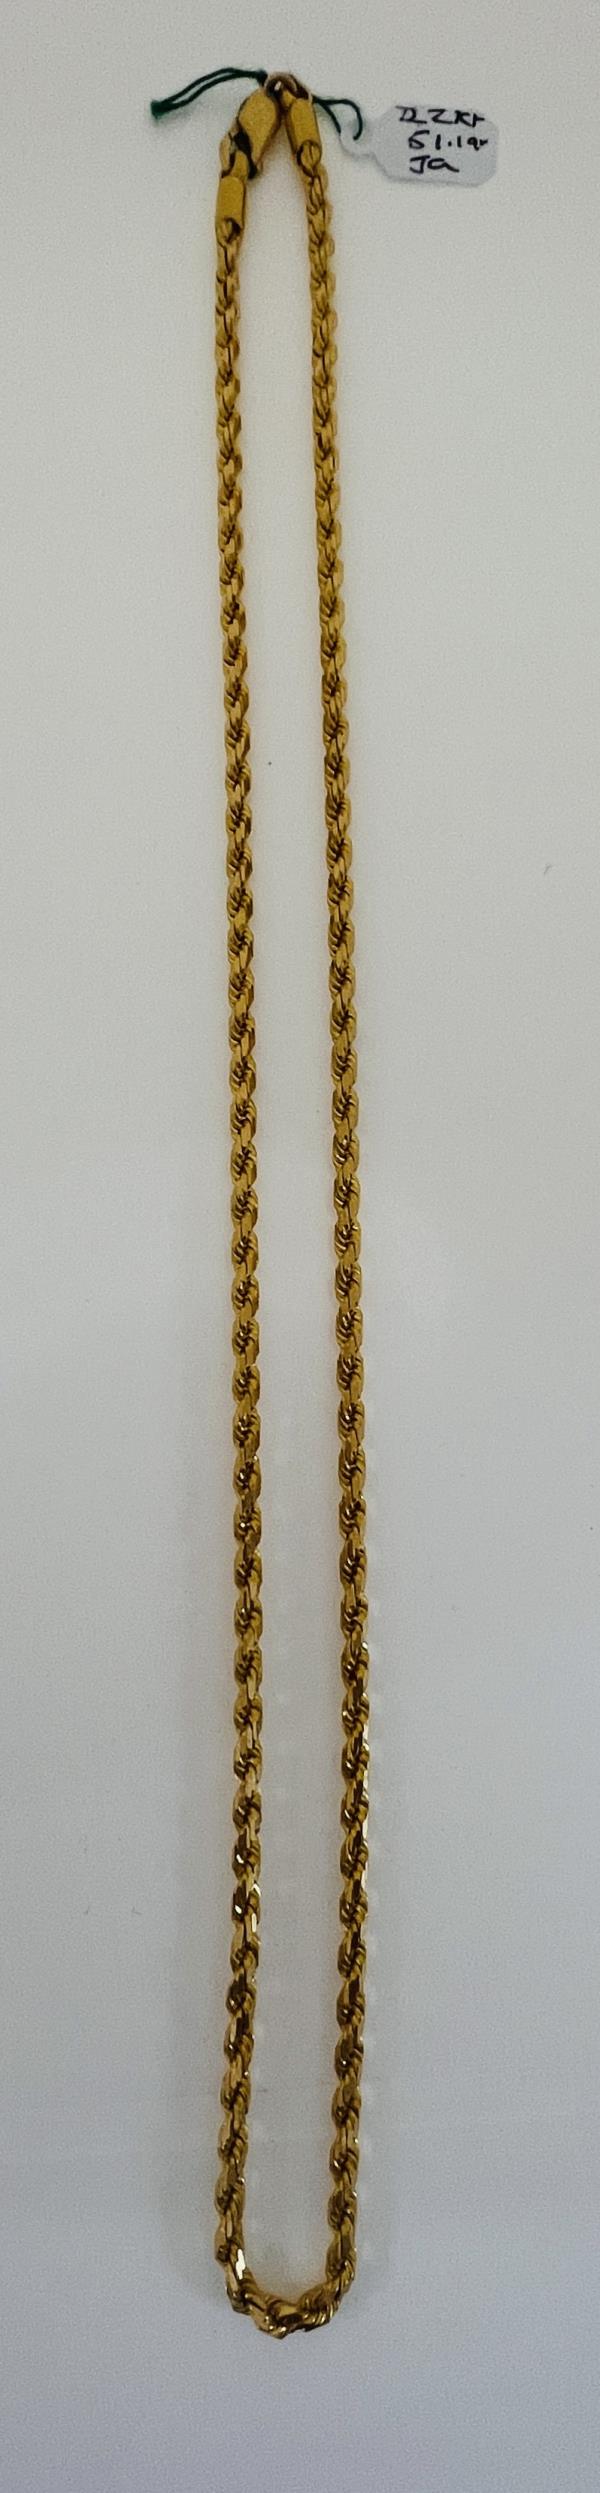 22KT GOLD CHAIN 22 " 51.1GM